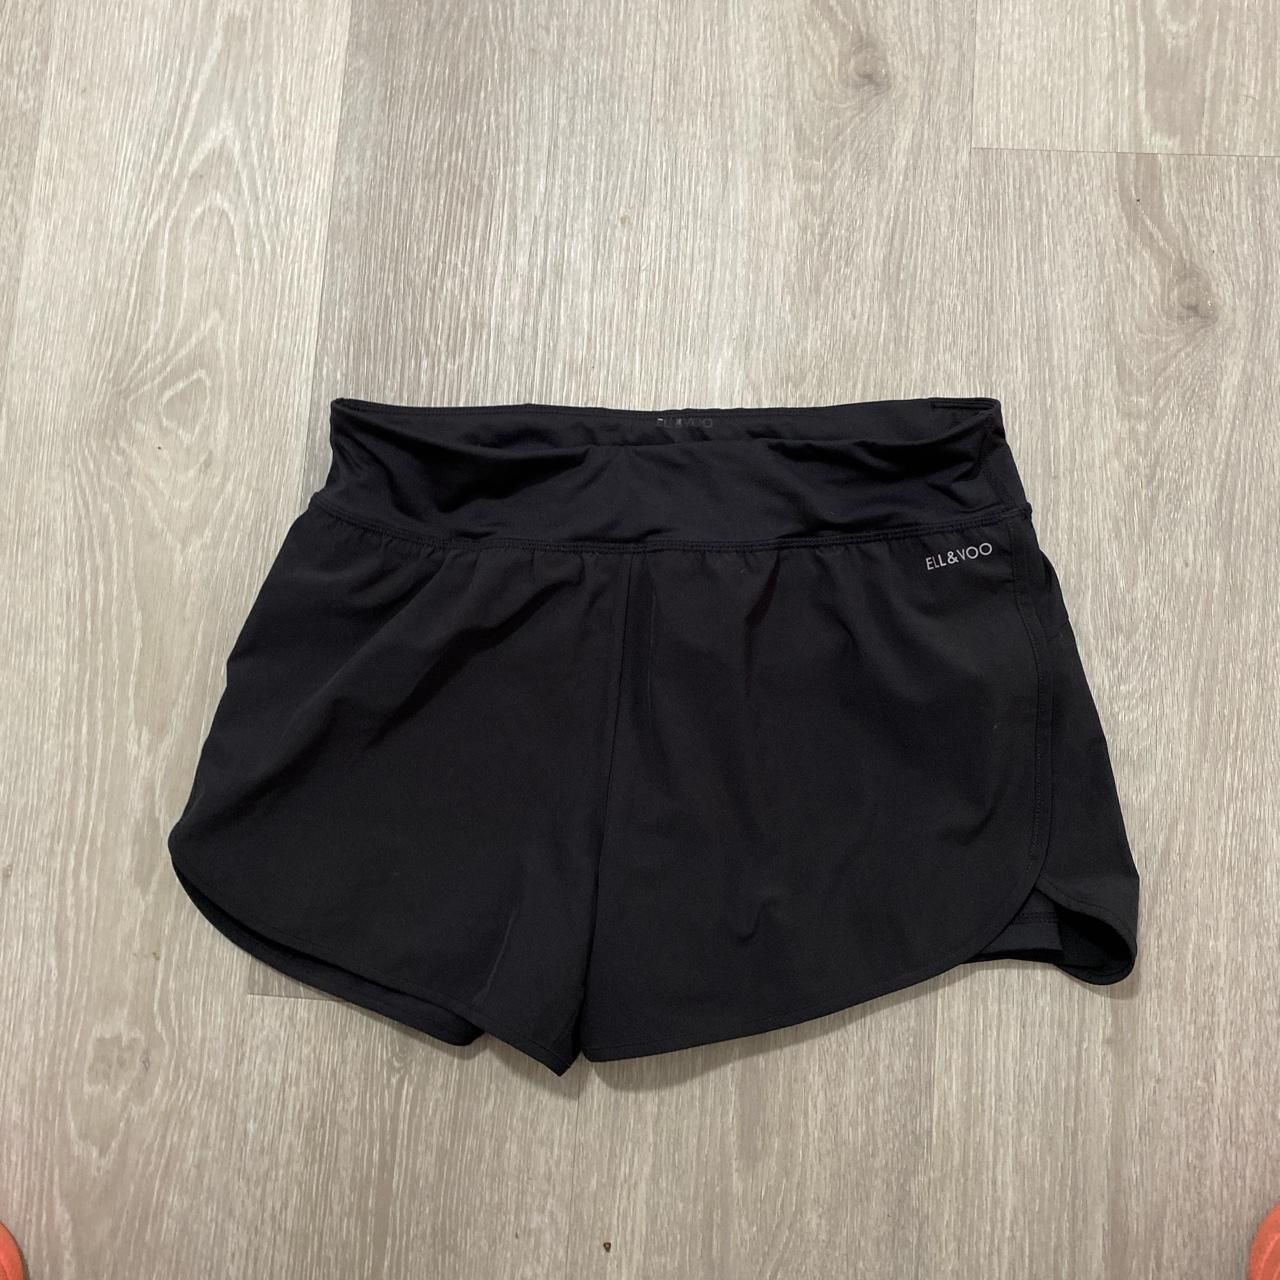 ELL and VOO 2 in 1 shorts - Depop